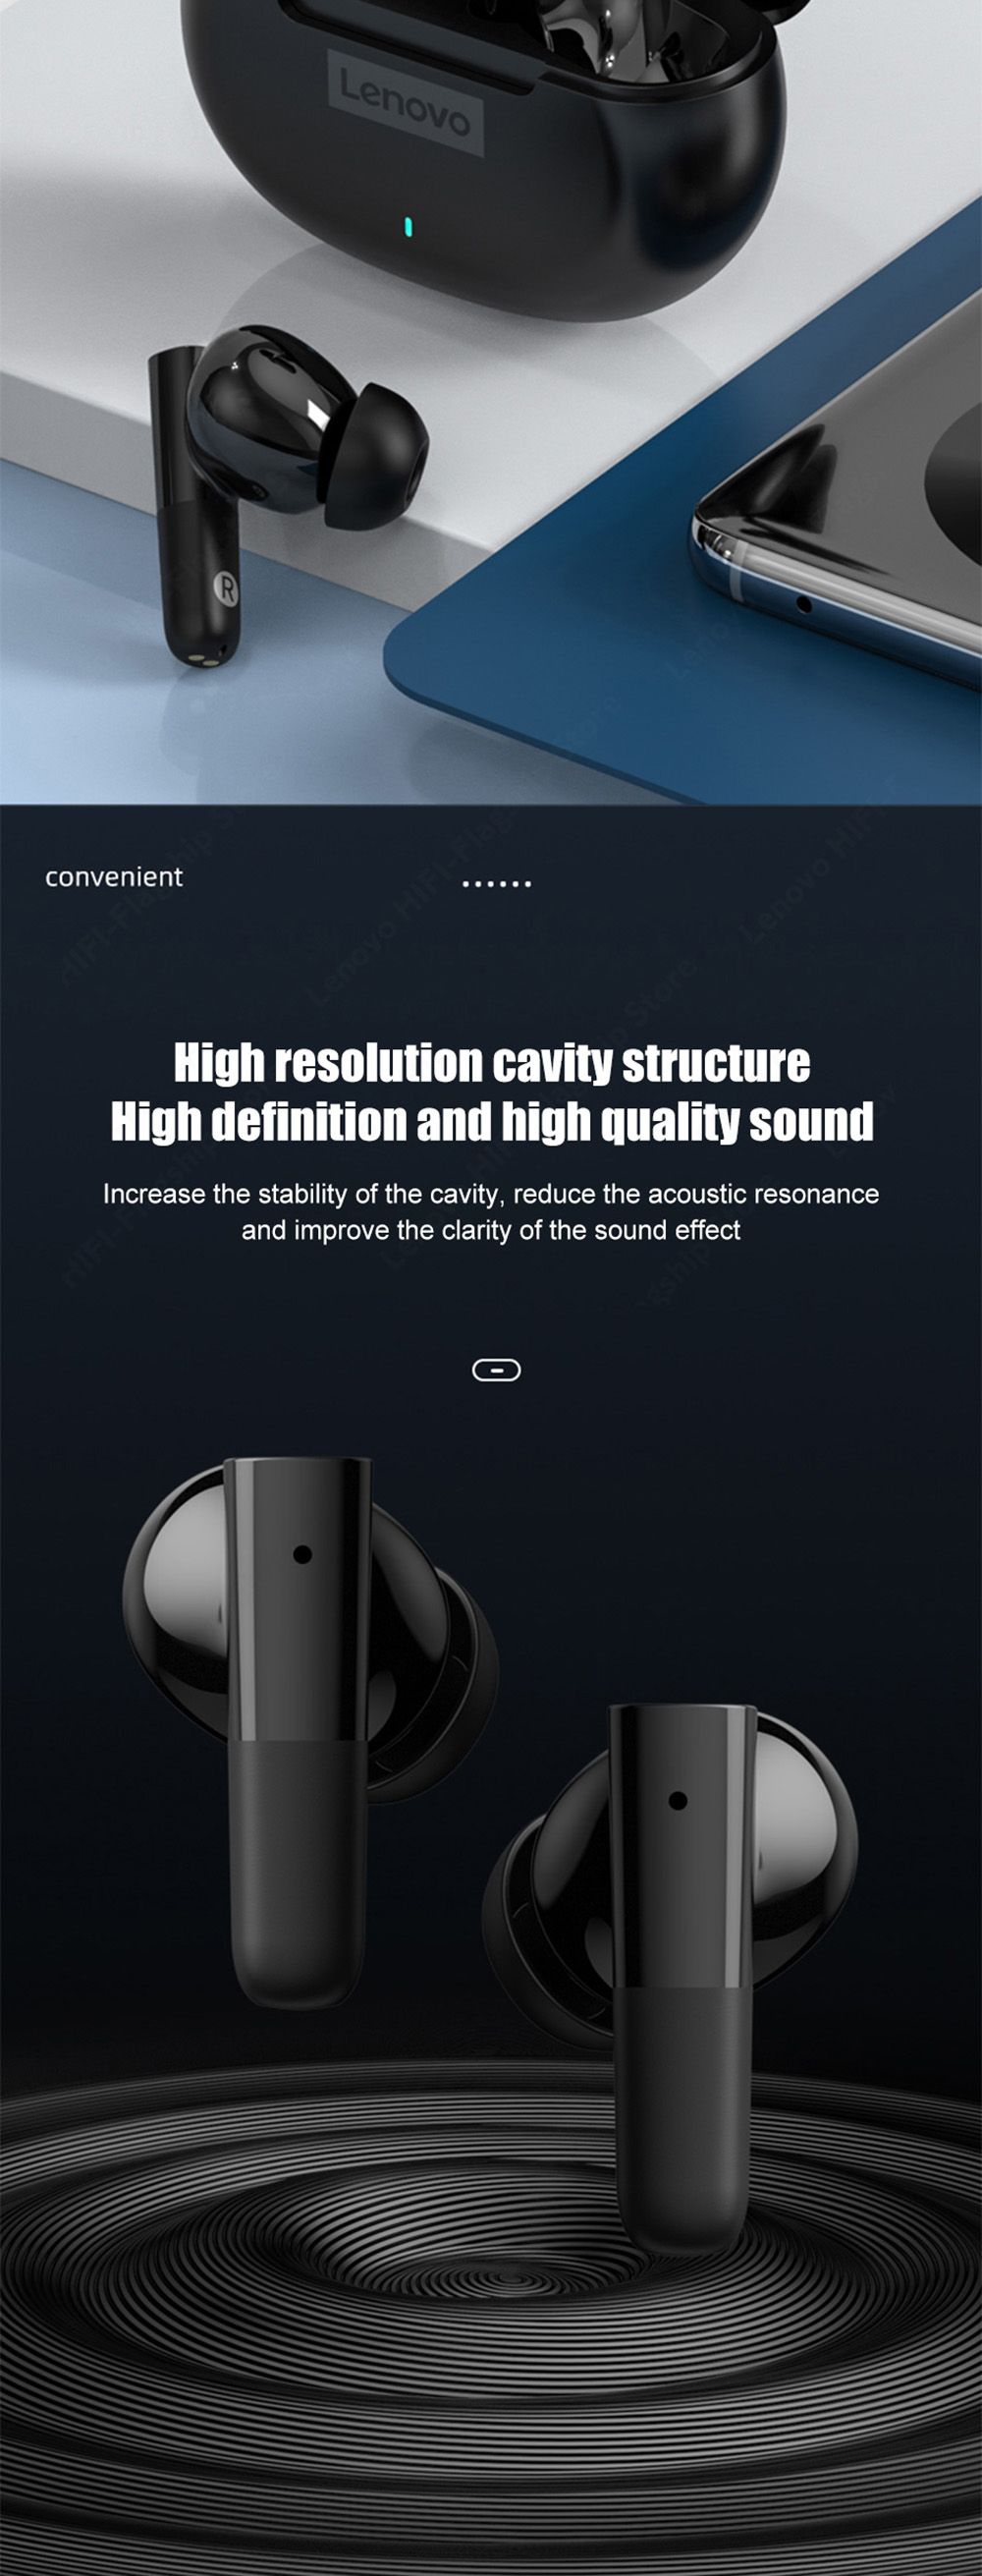 Lenovo LP3 ANC Wireless Headphones TWS Bluetooth 5.2 Earphone Active Noise Cancellation Earbuds HD Call with Mic - Black